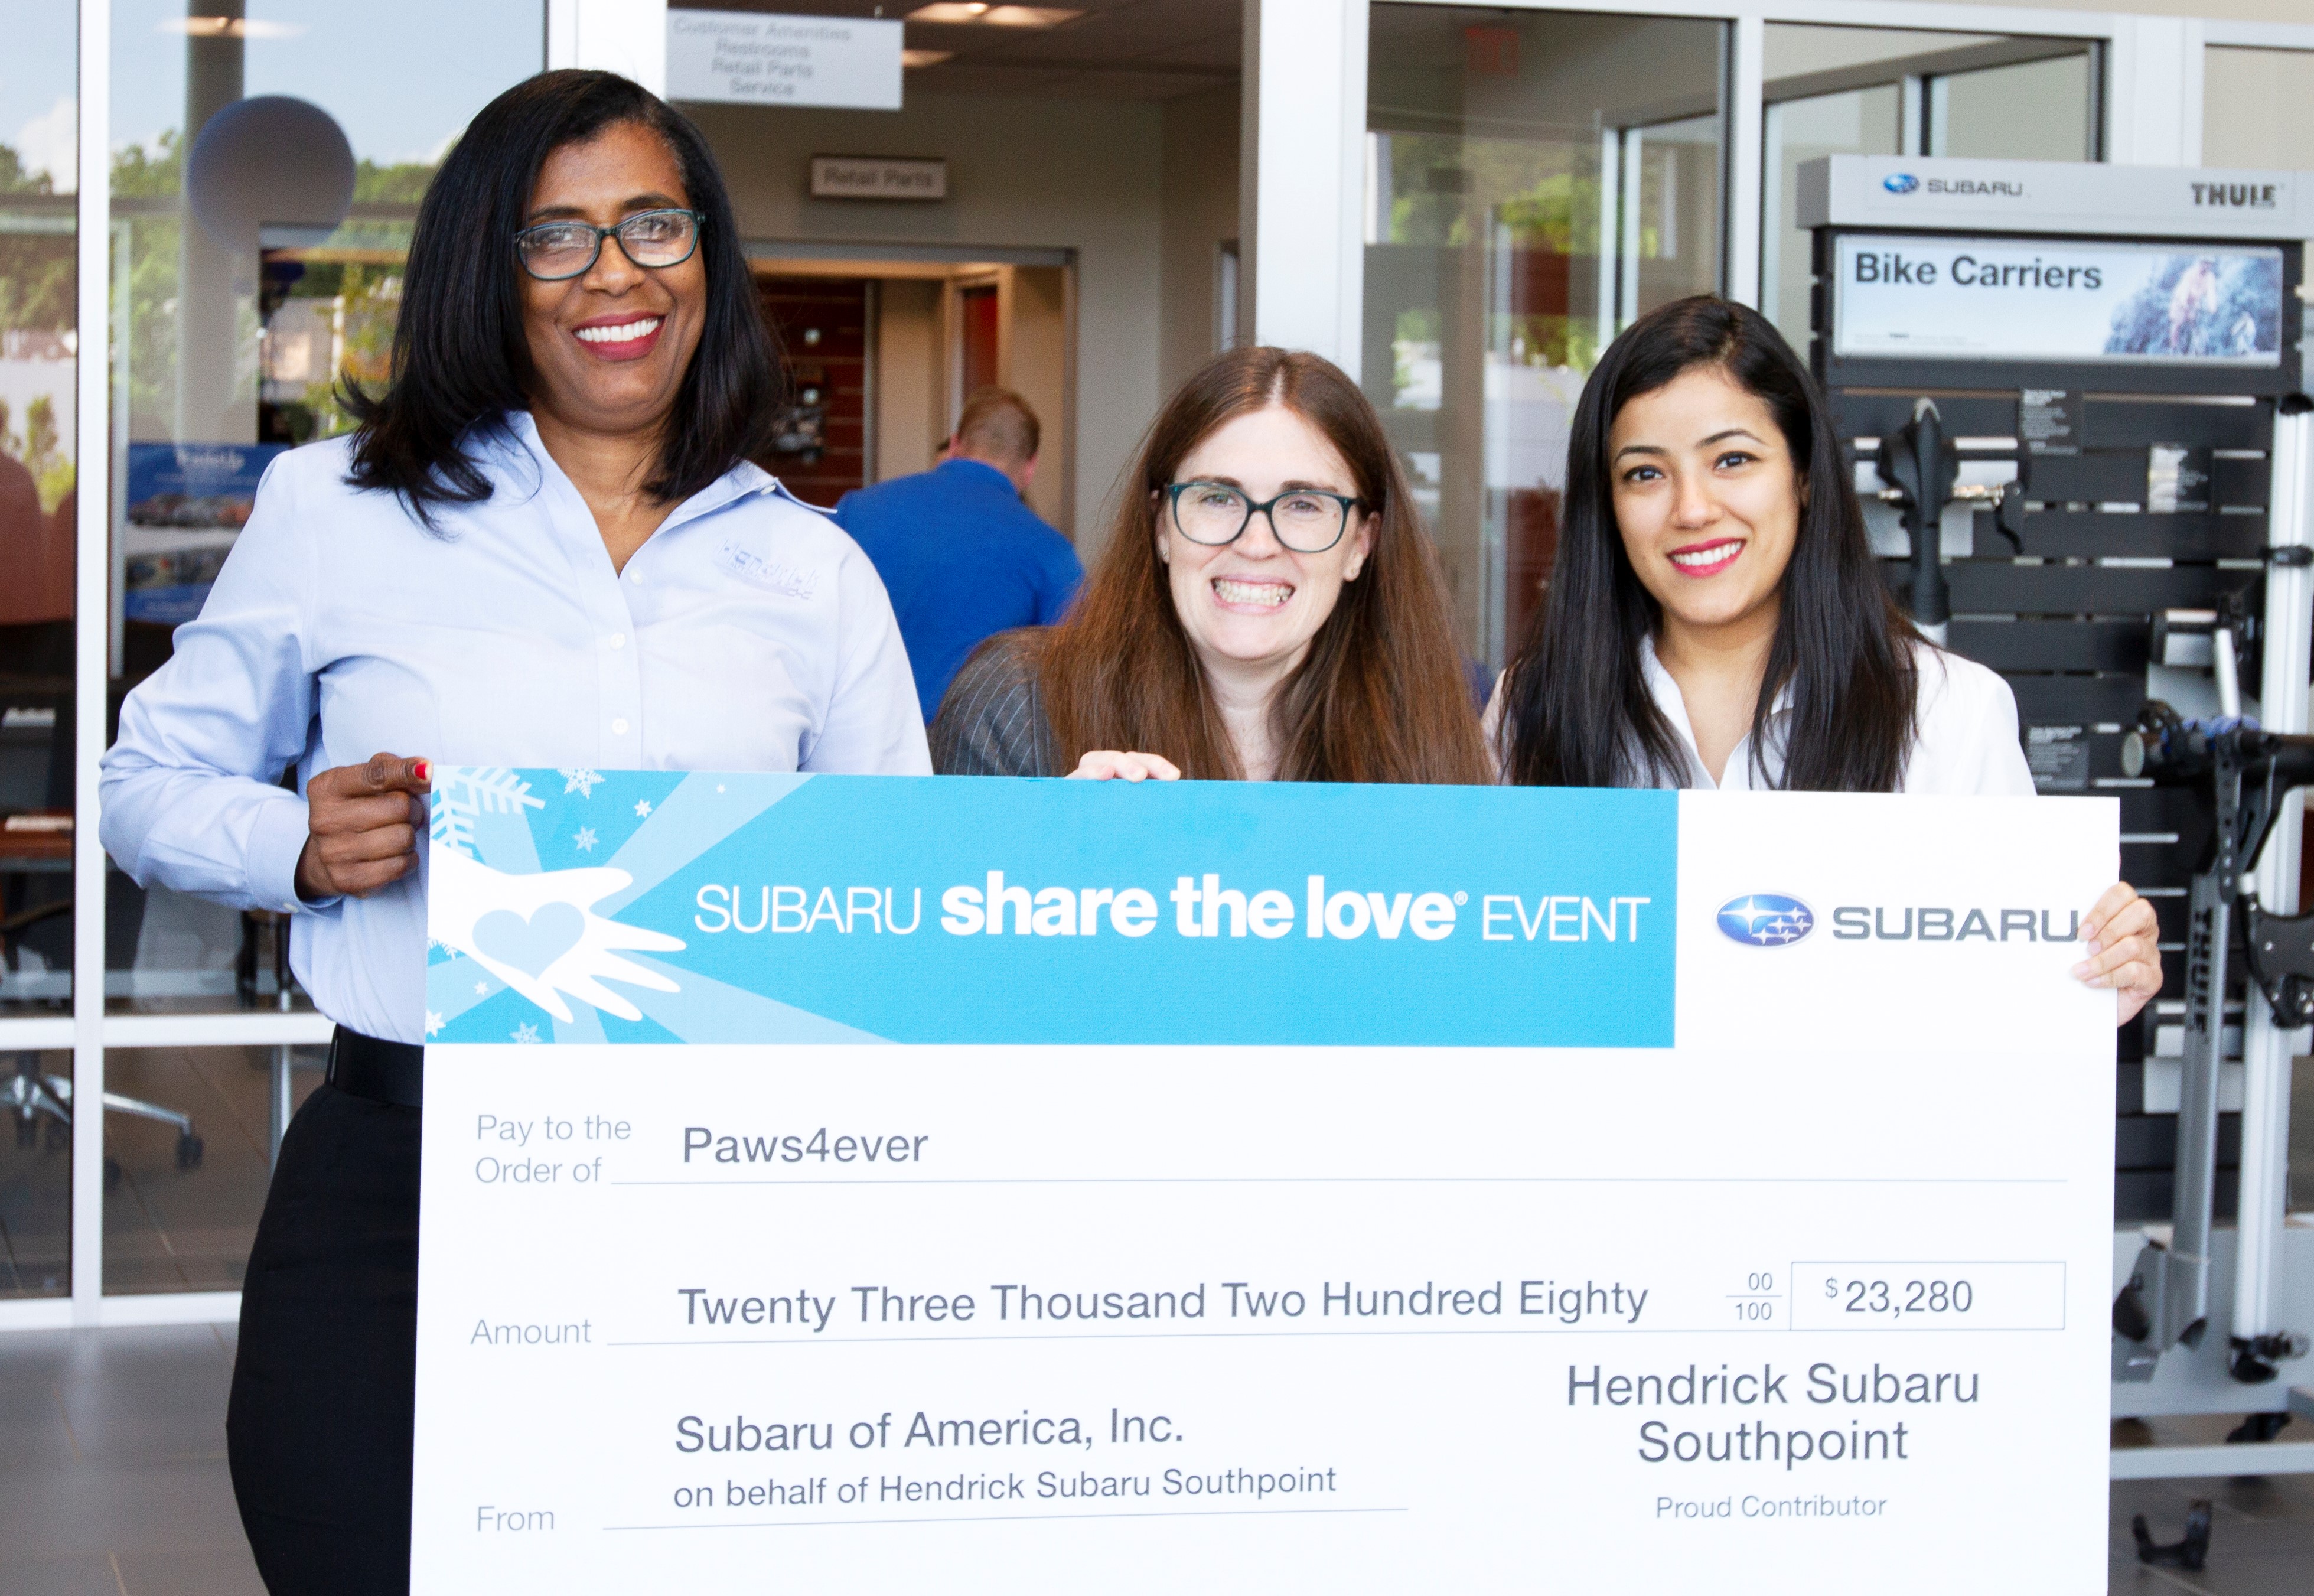 Hendrick Subaru Southpoint General Manager Anna Latta and Marketing Director Poonam Nandani present Paws4Ever with Share the Love donation check.